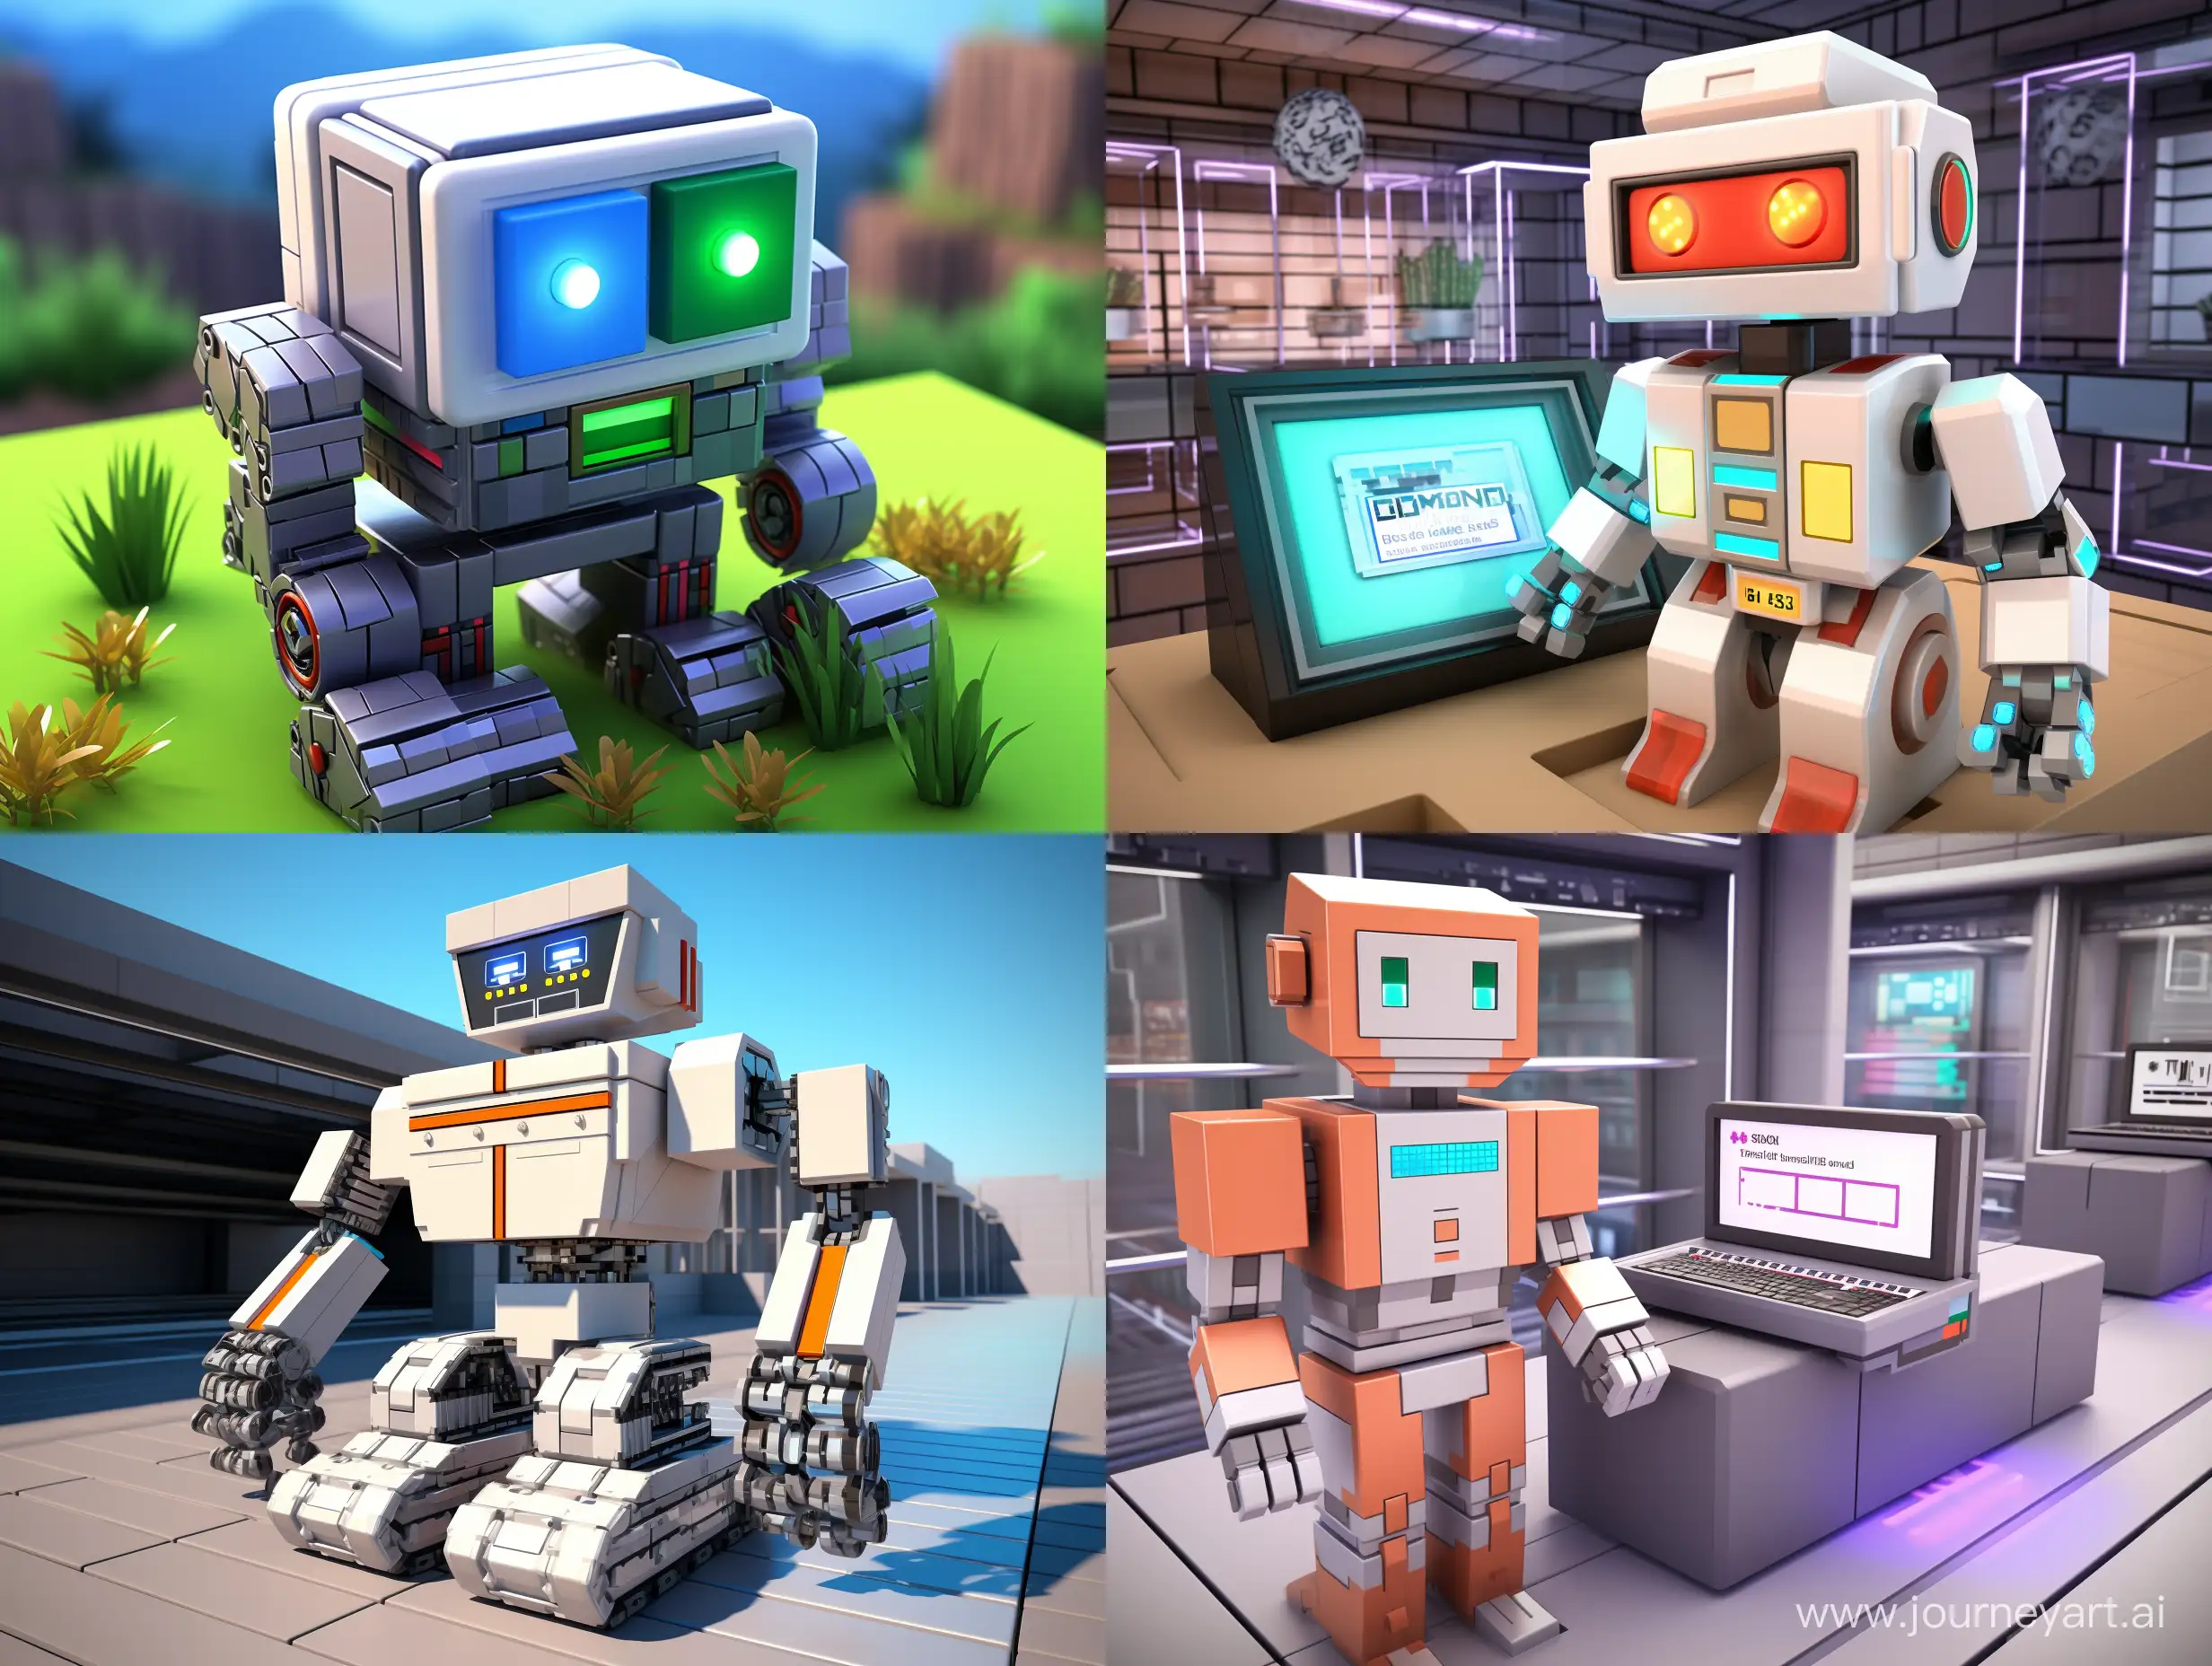 In this concept, a robot inspired by Minecraft showcases its building skills while holding Minecraft blocks in its hands. The robot incorporates special AI mechanisms, highlighting the integration of artificial intelligence within the Minecraft world. The design places the robot in the background of the header, demonstrating its actions and construction abilities. Your channel name or logo can be positioned in the upper part of the header.